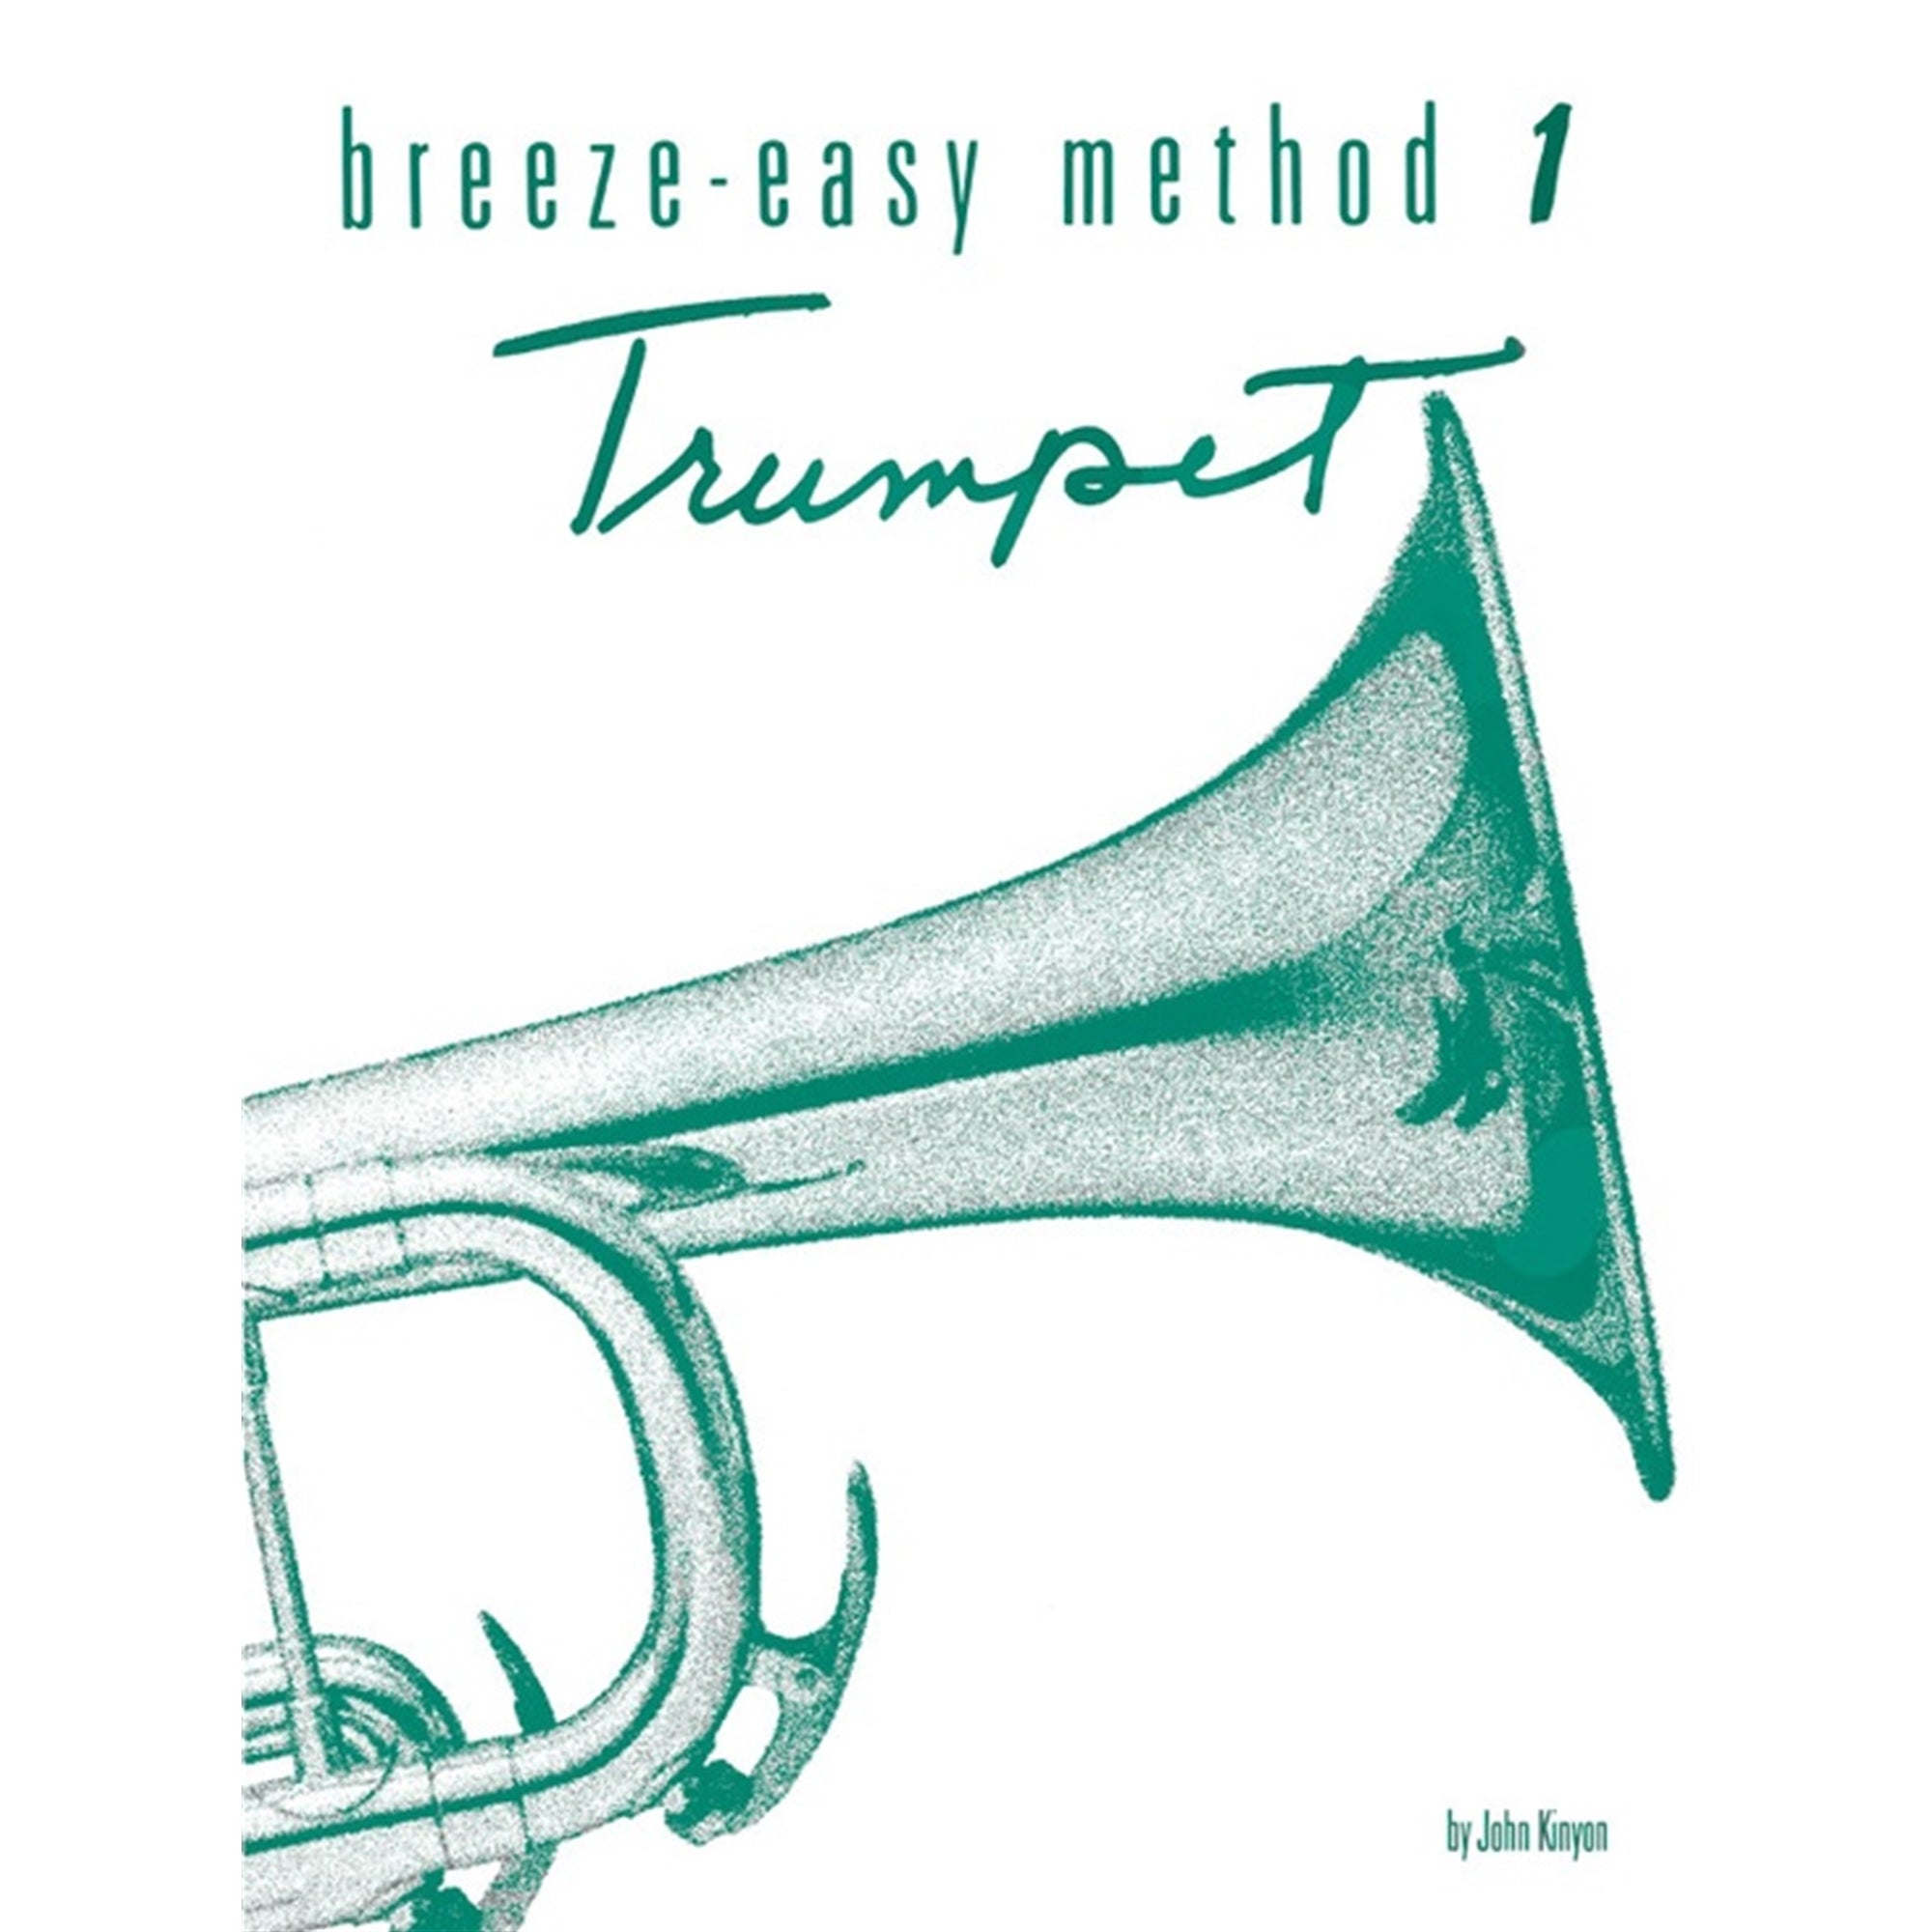 ALFRED 00BE0019 Breeze-Easy Method for Trumpet (Cornet), Book I